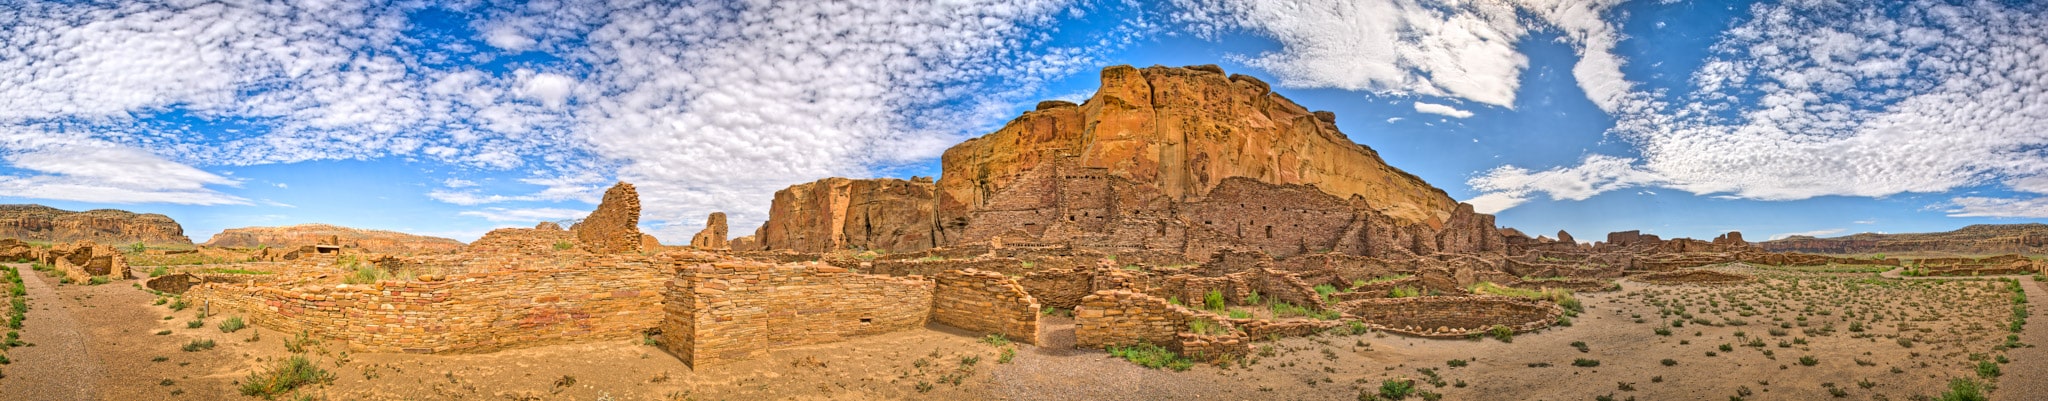 This panorama shows the entire Pueblo Bonito great house site. Pueblo Bonito was the largest of the Chacoan great houses with over 700 rooms, 32 kivas, and 3 great kivas. Pueblo Bonito is located in Chaco Canyon, New Mexico.